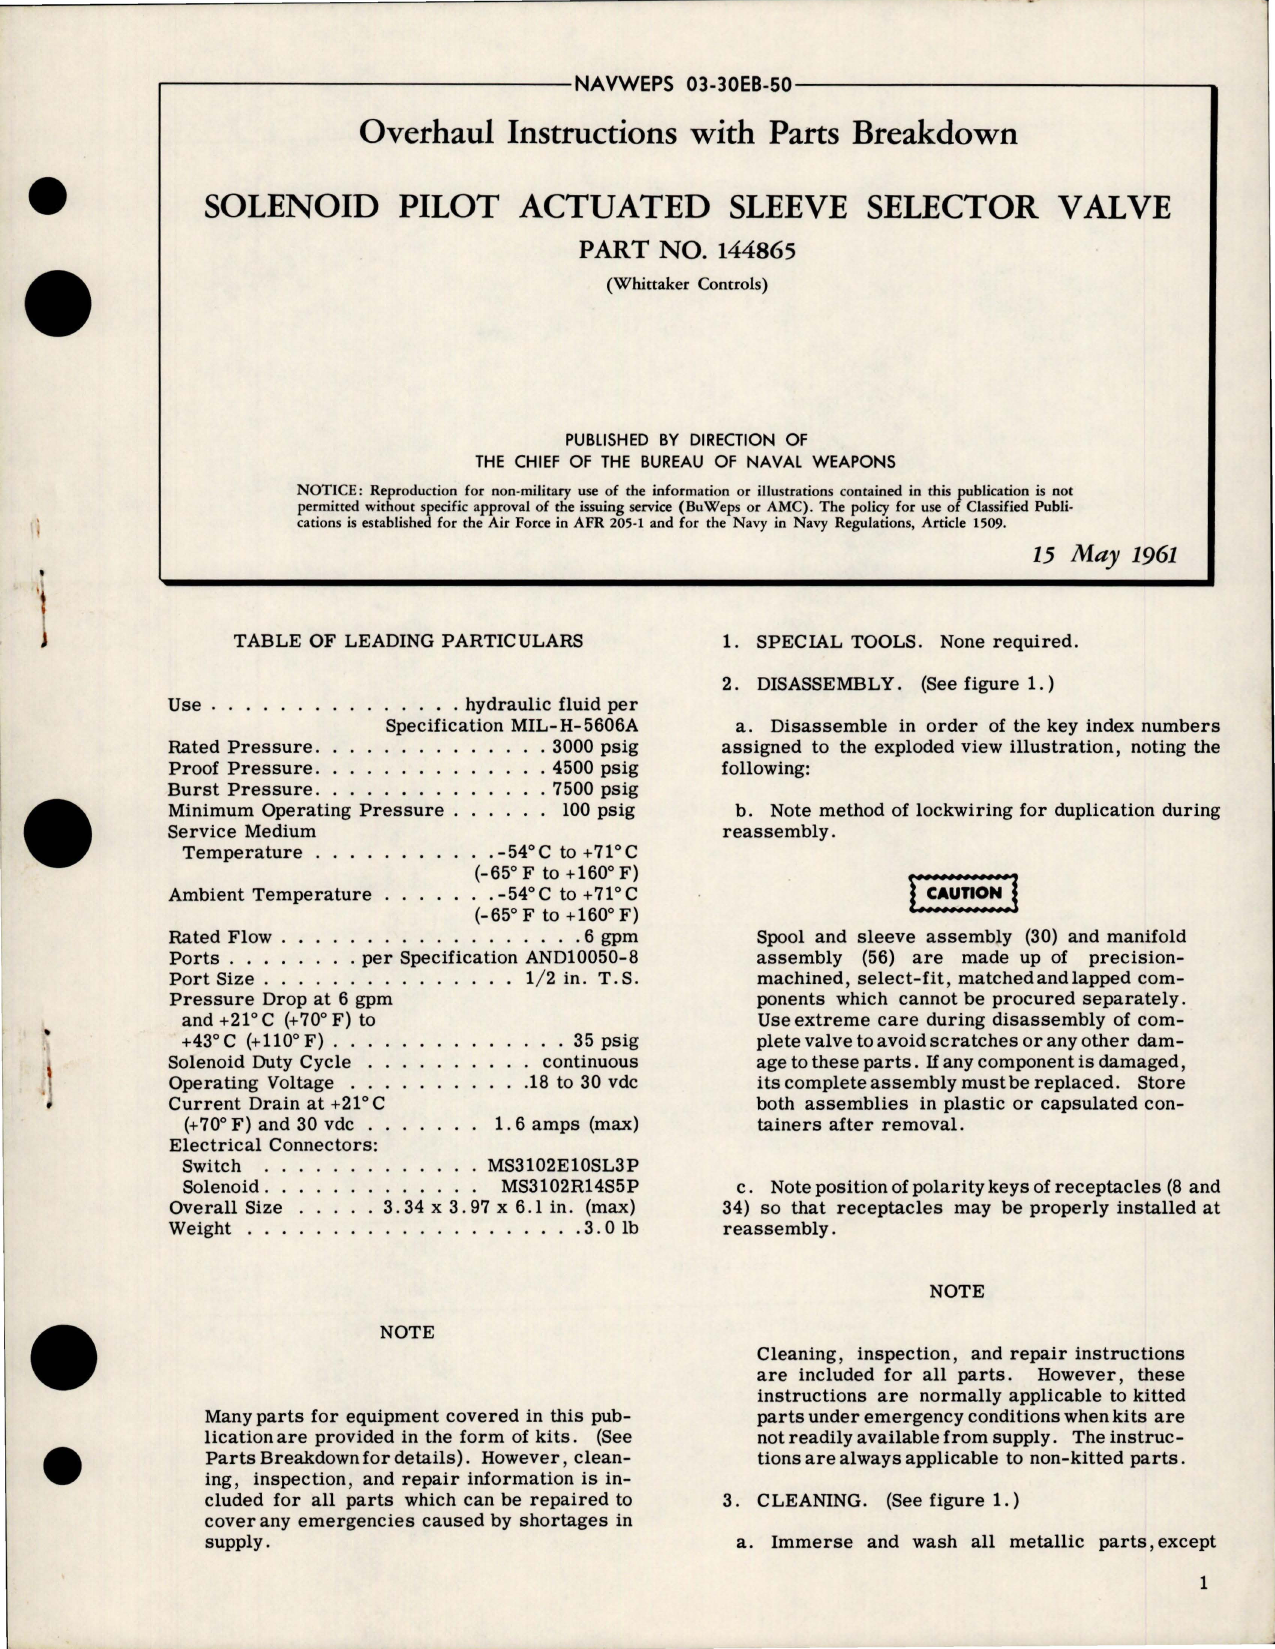 Sample page 1 from AirCorps Library document: Overhaul Instructions with Parts for Solenoid Pilot Actuated Sleeve Selector Valve - Part 144865 